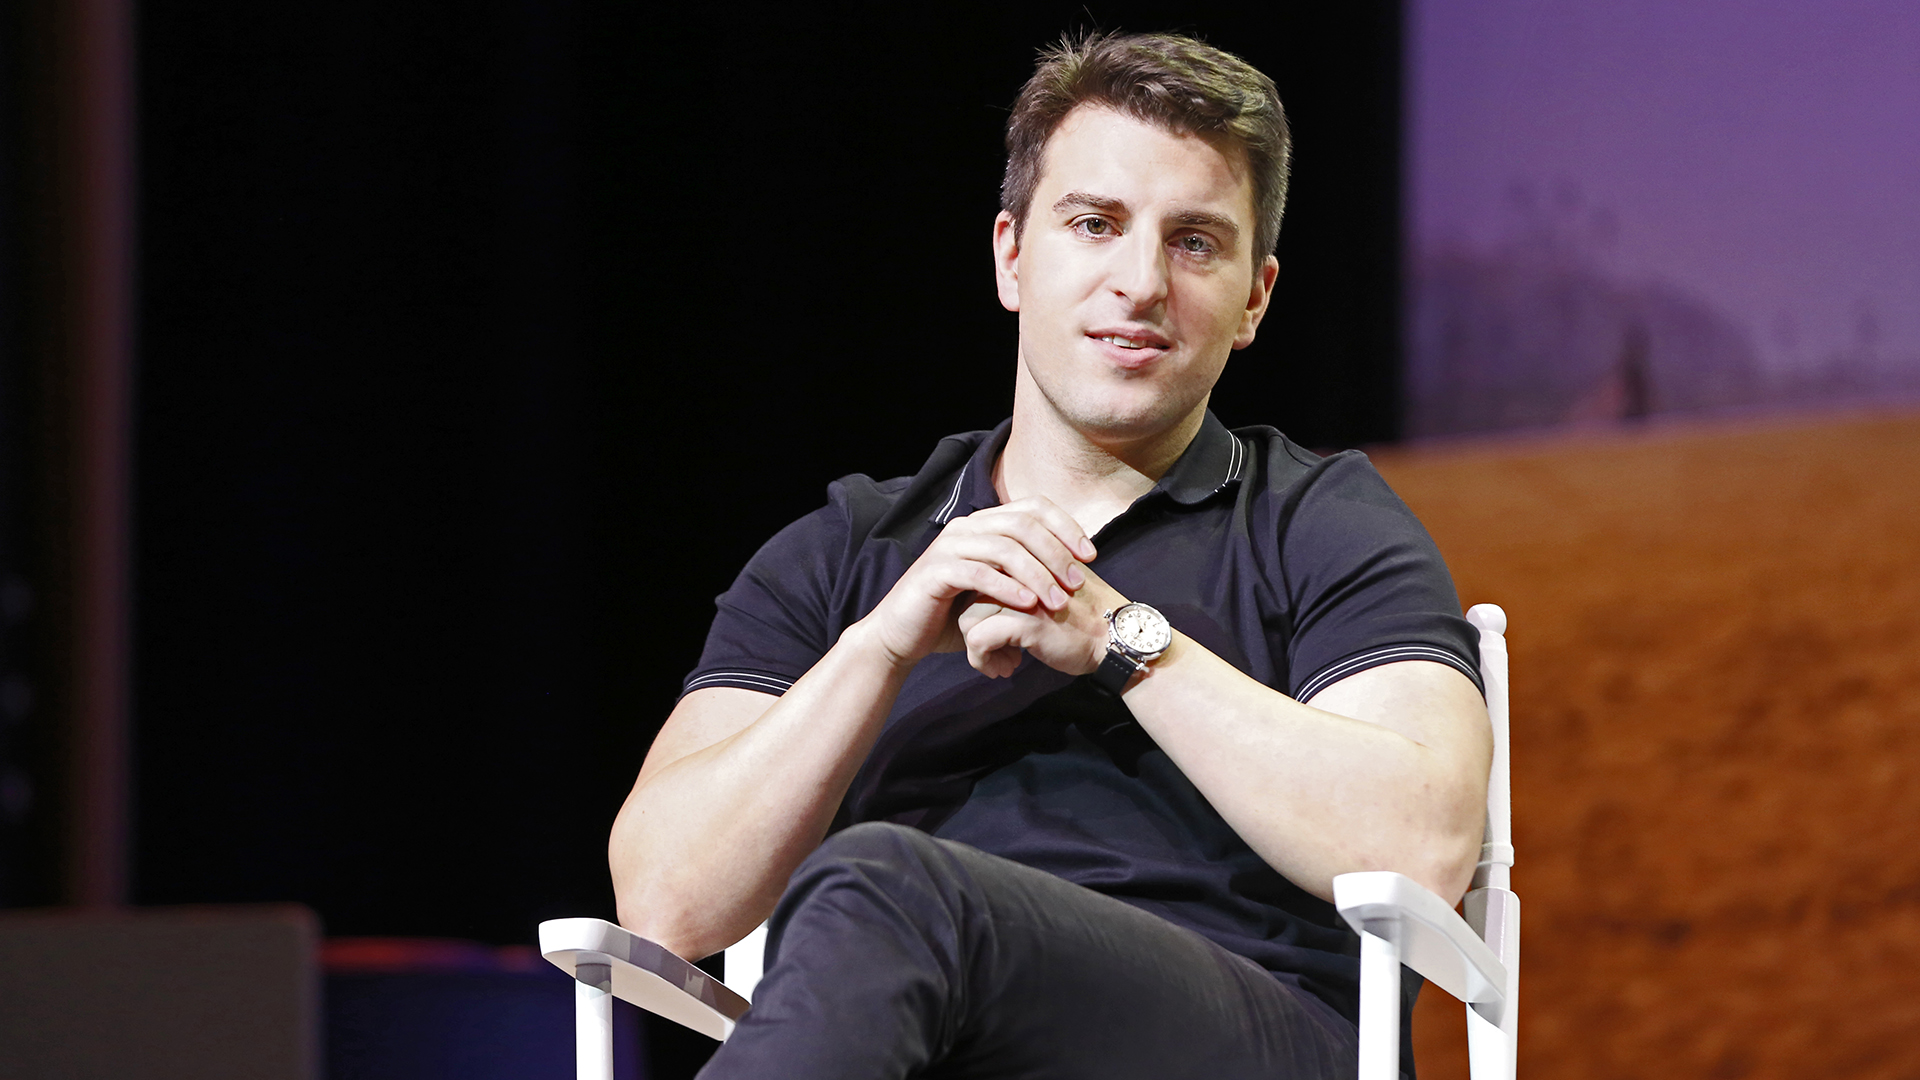 Customers will now be able to see the full price breakdown with Airbnb service fee, discounts and taxes, according to Brian Chesky's tweet.  (Photo by Kurt Krieger/Corbis via Getty Images) 